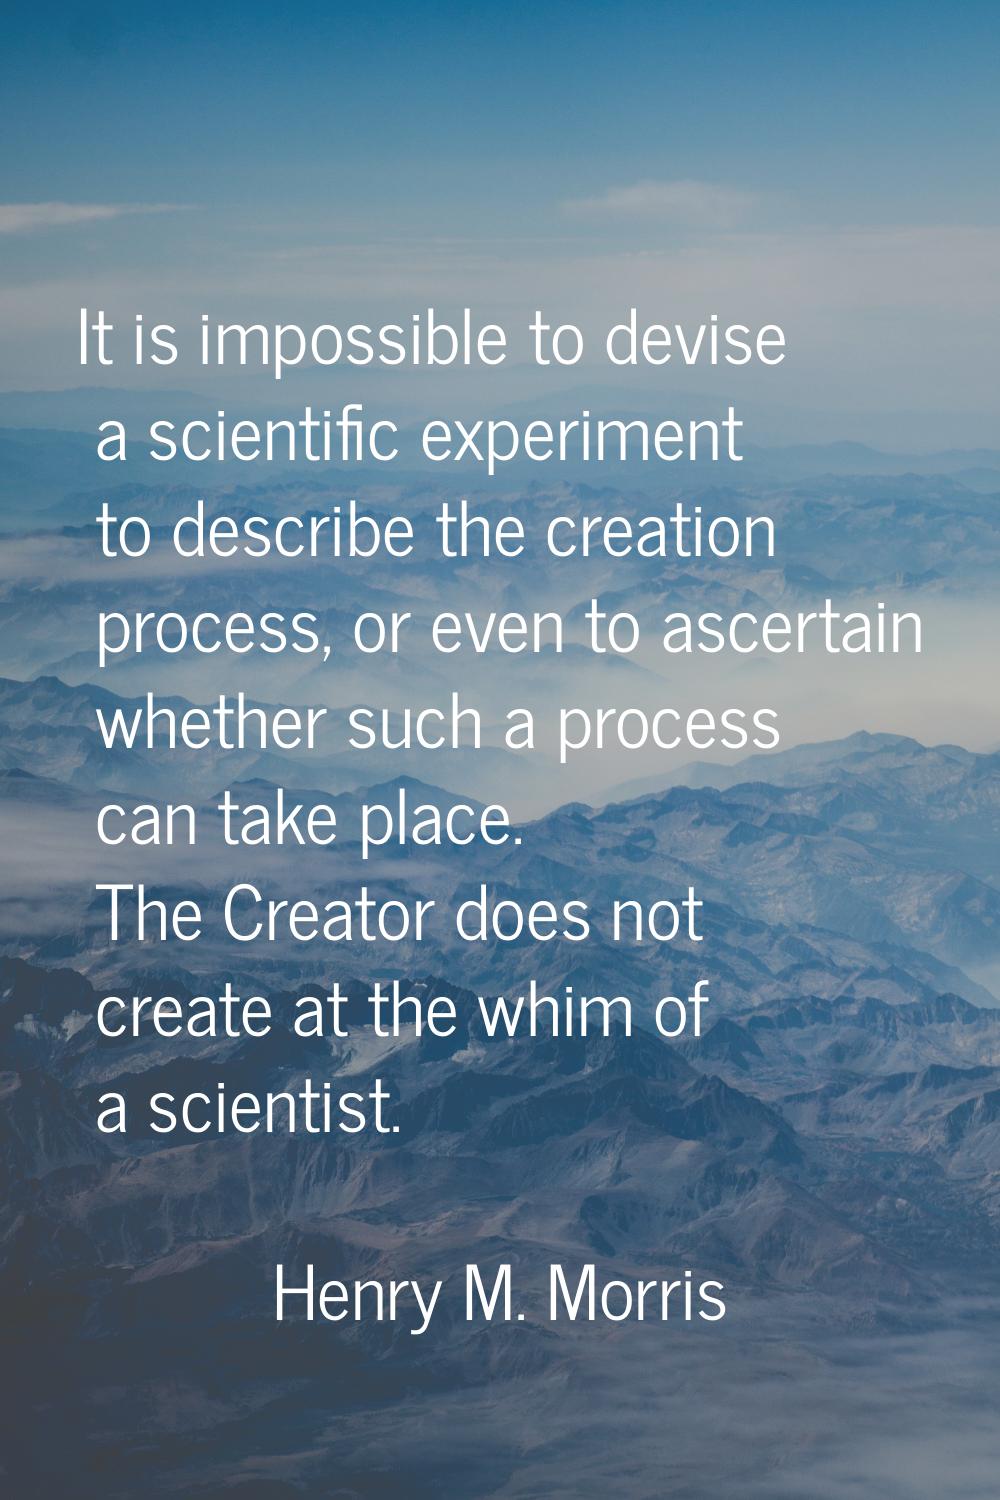 It is impossible to devise a scientific experiment to describe the creation process, or even to asc